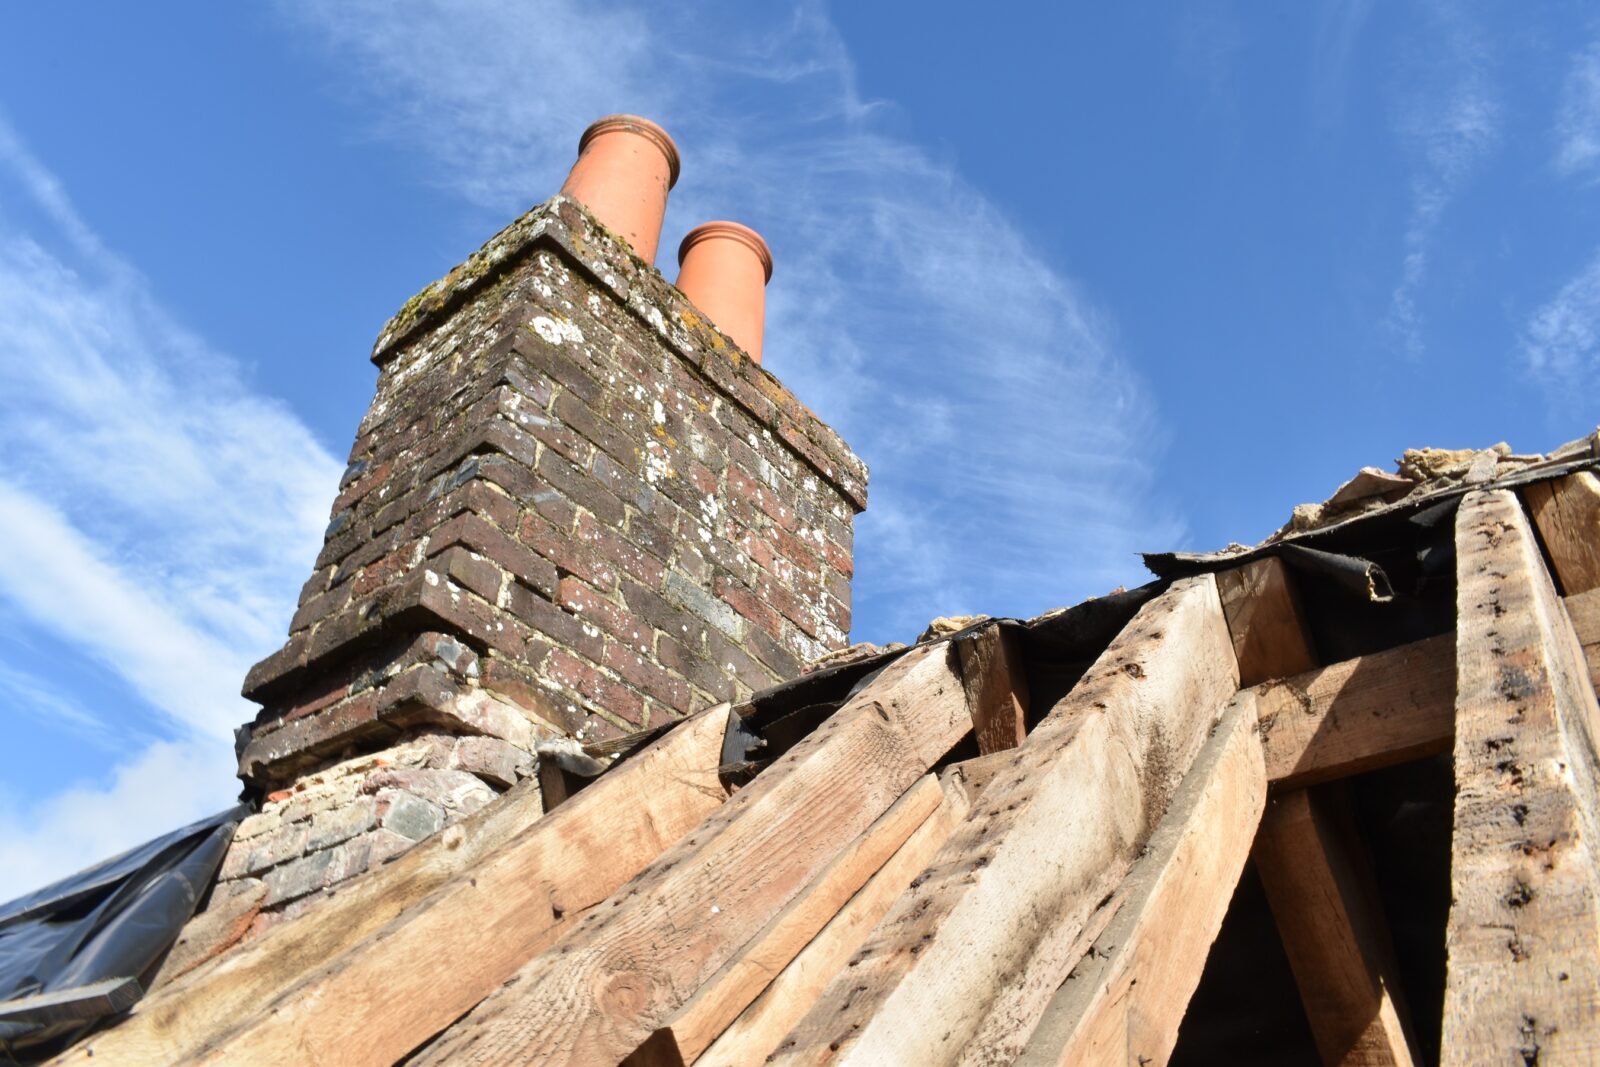 Work to restore the roof at Jane Austen's House